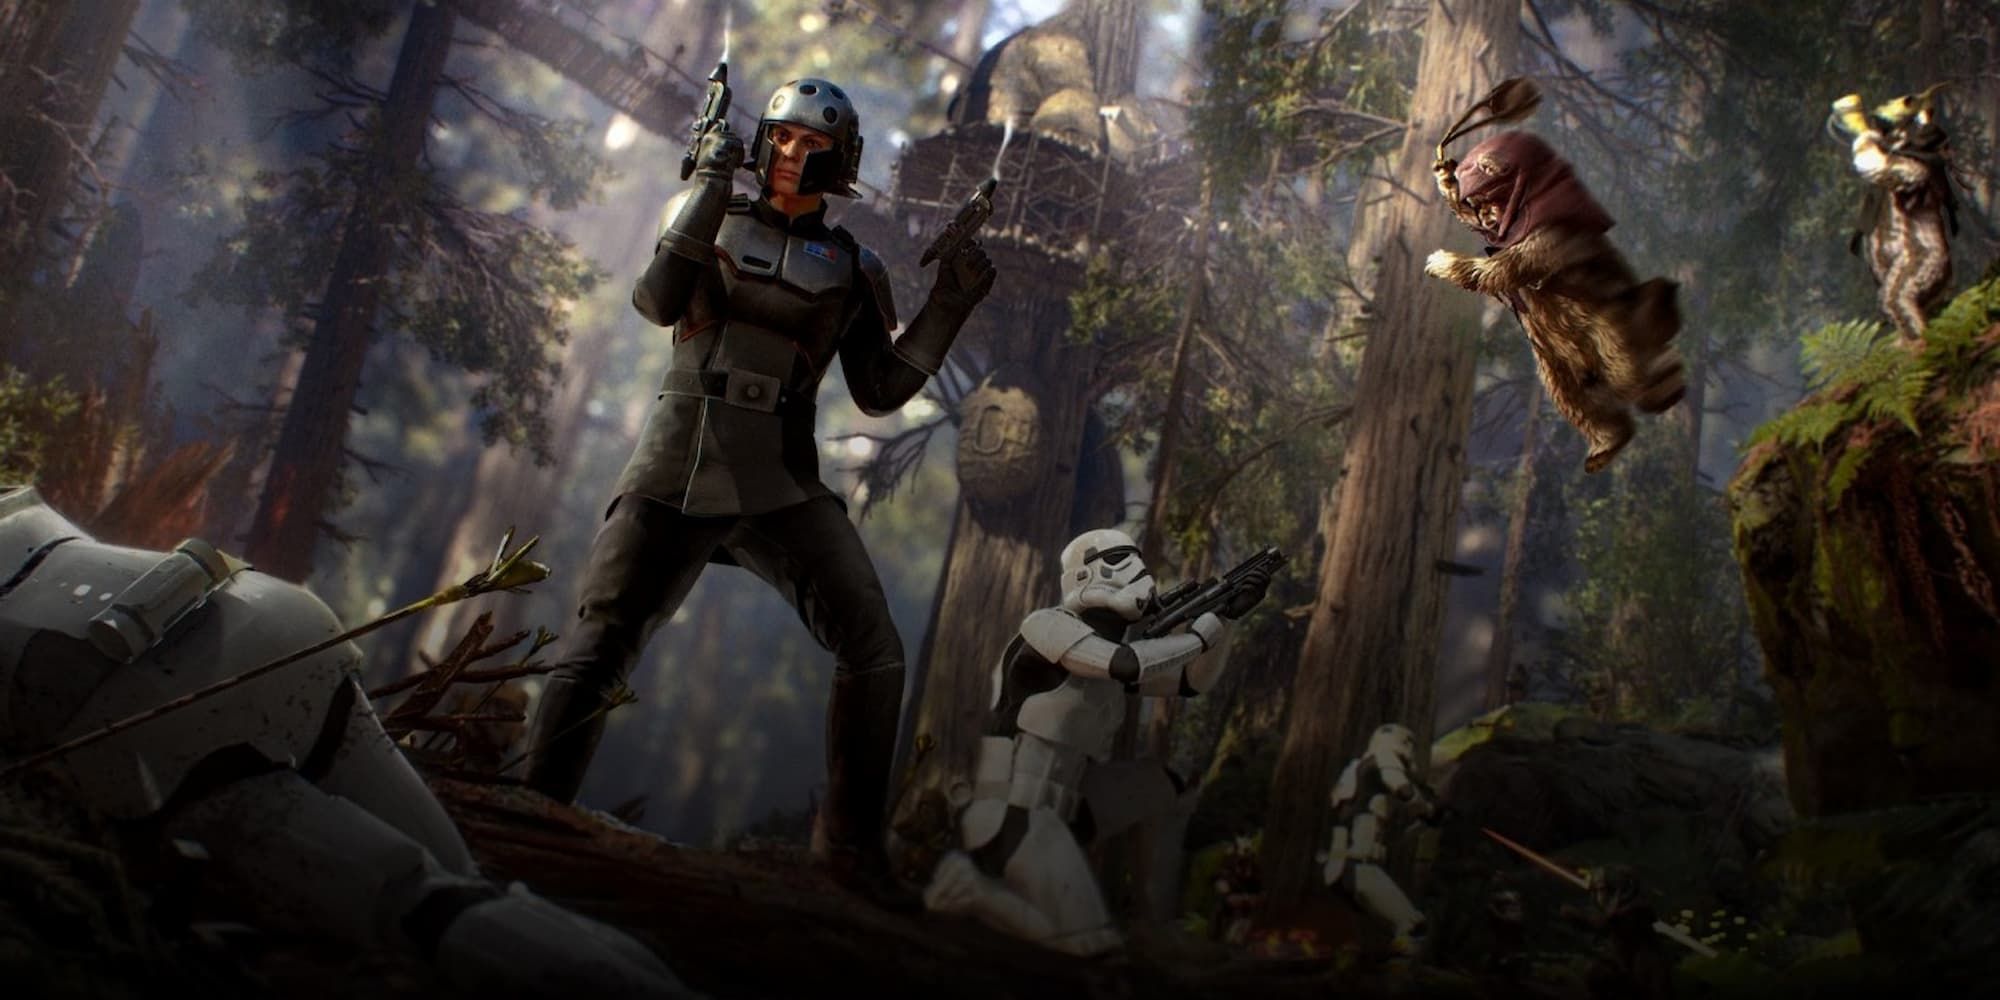 An imperial officer and Stormtroopers are attacked by Ewoks in Star Wars: Battlefront 2.